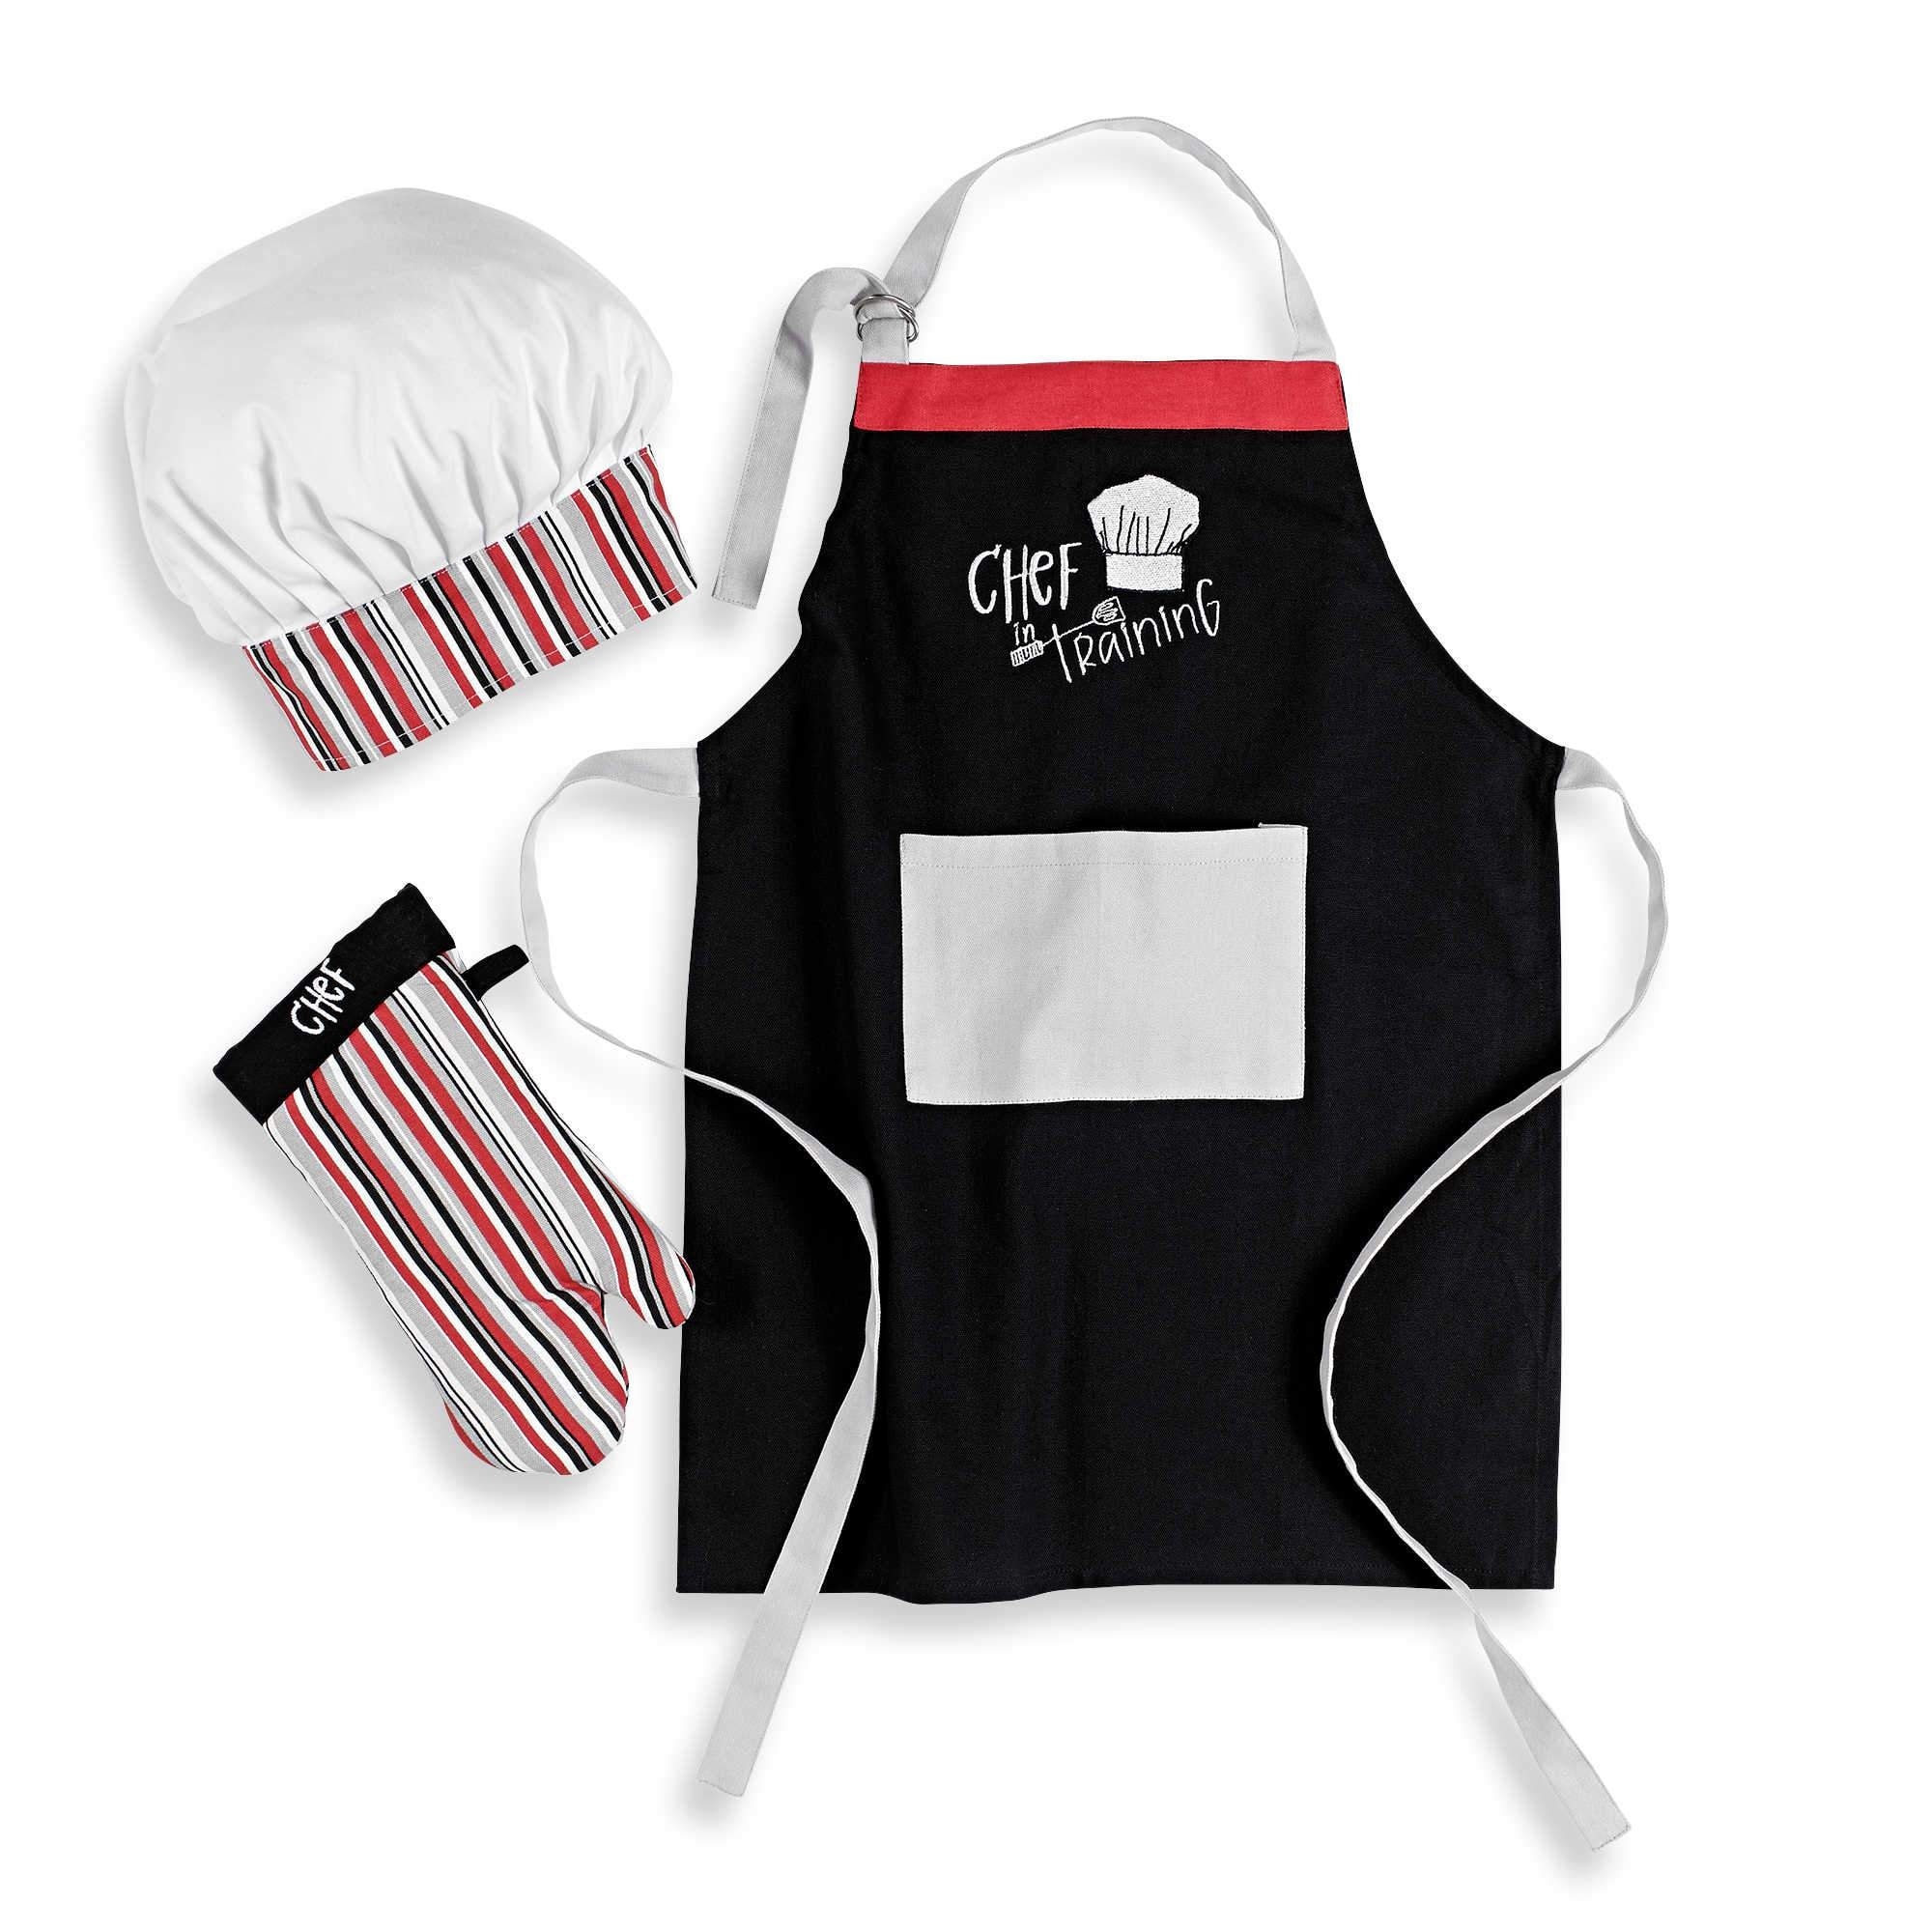 Cactus Kids Apron and Chef Hat Set-Adjustable Child Apron for Boys and Girls Aged 6-14,Children’s Kitchen Bib Aprons with Large Pocket for Cooking Baking Painting 